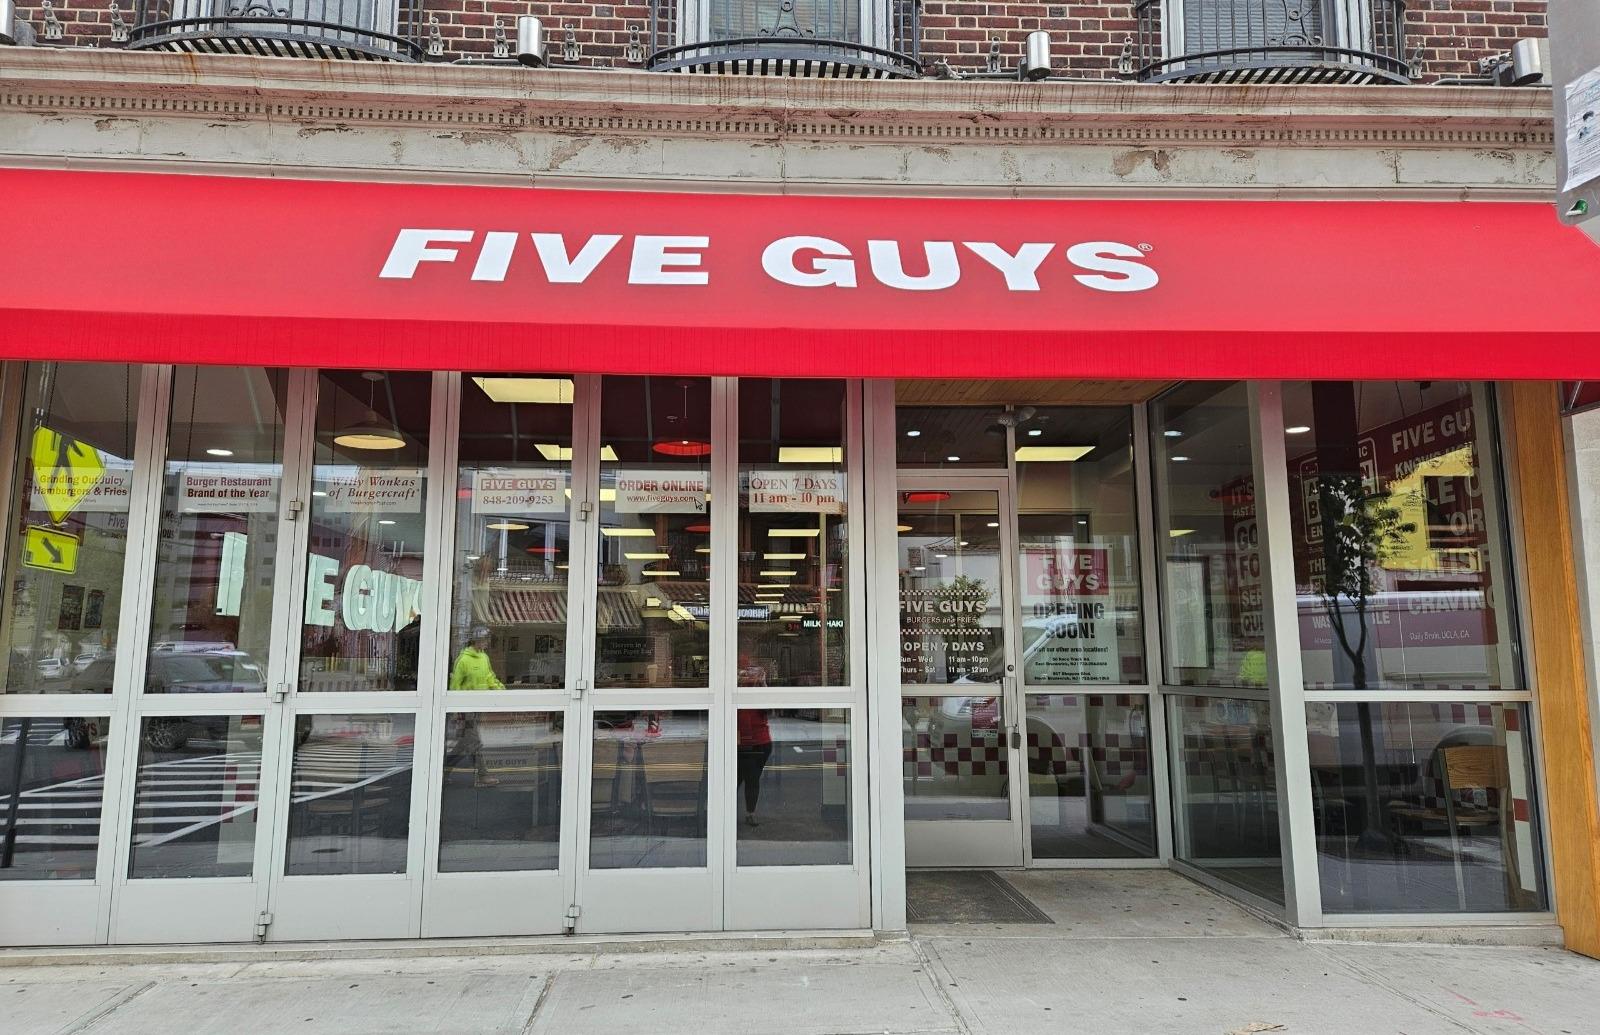 Exterior photograph of the Five Guys restaurant at 47 Easton Avenue in New Brunswick, New Jersey.